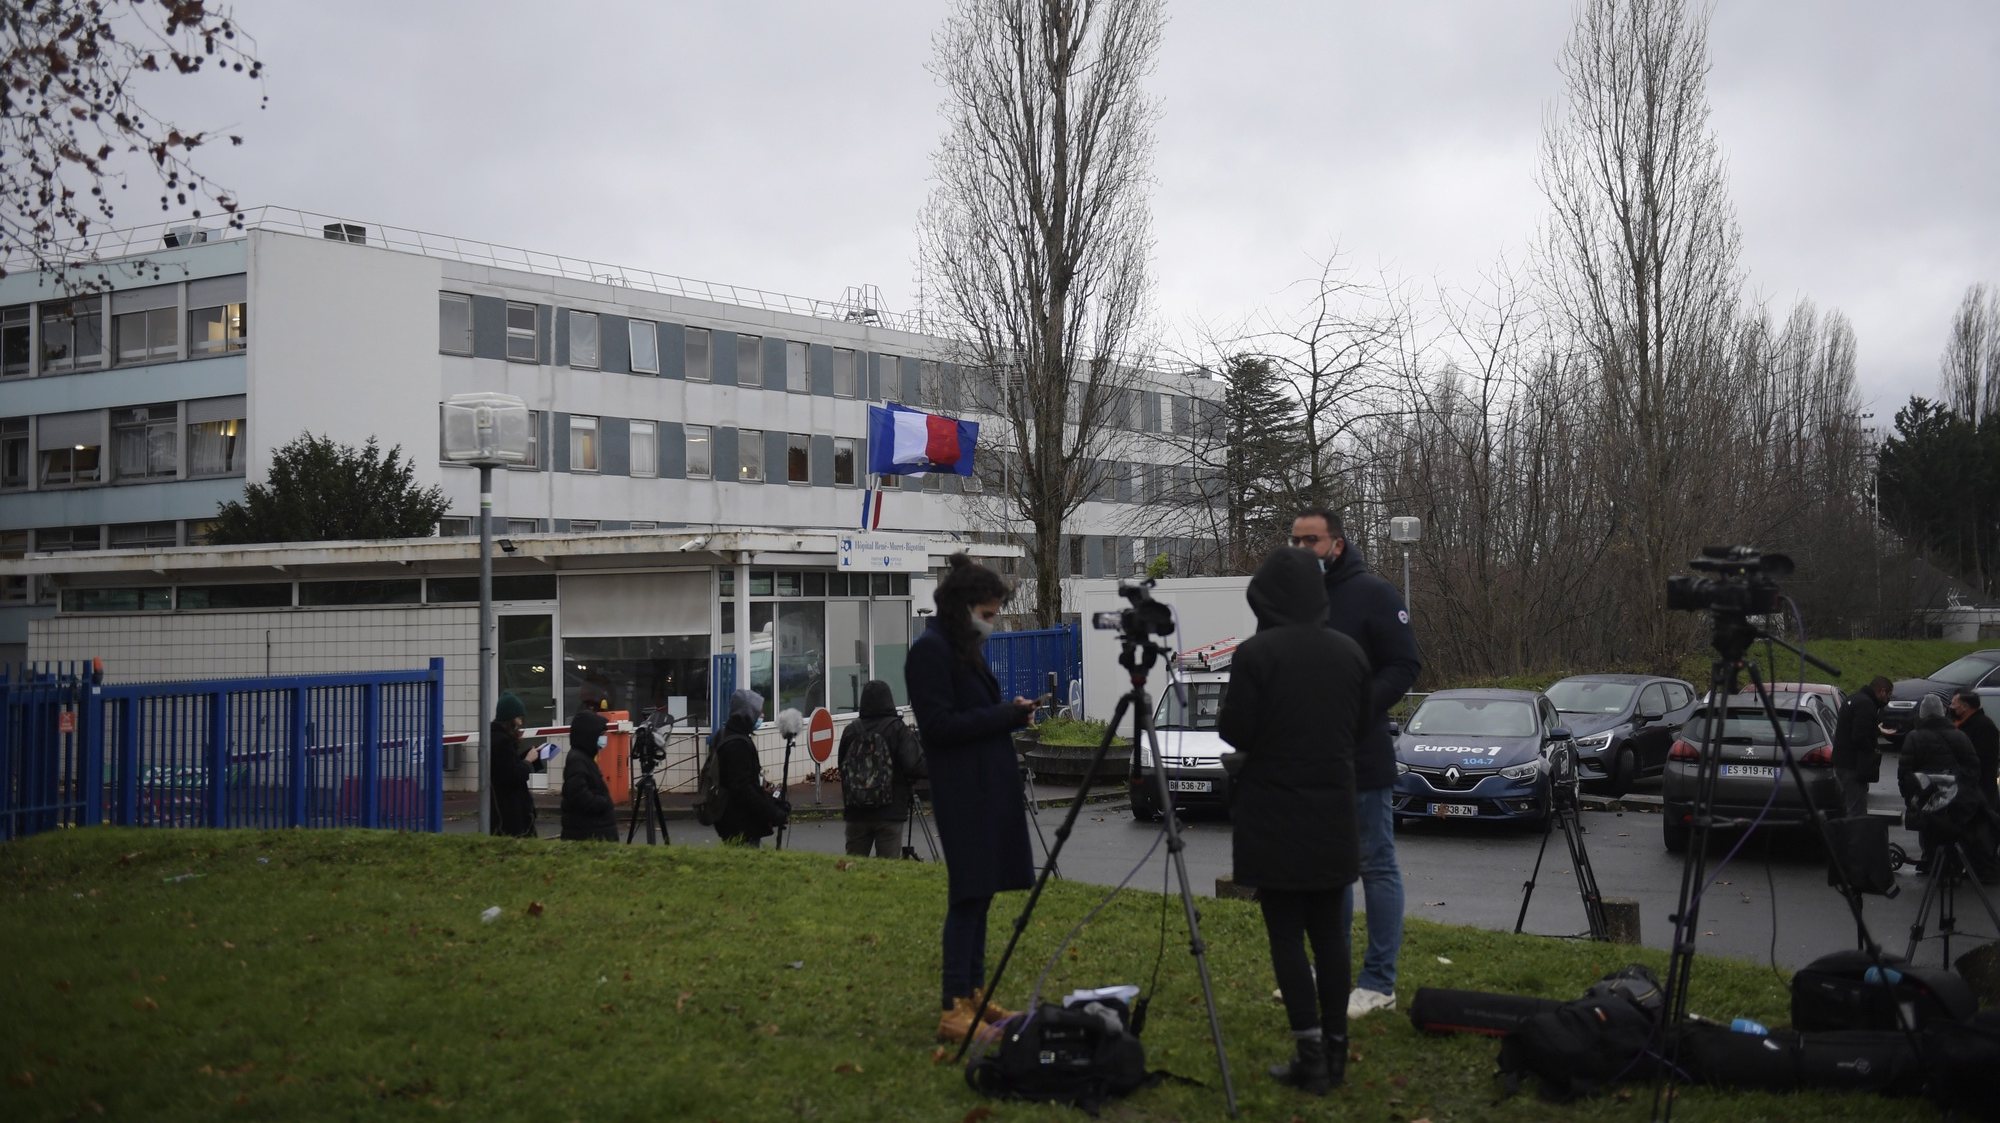 epa08906140 Journalists attend at the entrance of the Rene-Muret hospital in Sevran, on the outskirts of Paris, France, 27 December 2020, after the first doses of the Pfizer-BioNTech COVID-19 vaccine were given. A 78-year-old woman was the first person who received a dose of the COVID-19 vaccine in France against Covid-19, as countries of the European Union began a vaccine rollout.  EPA/Julien de Rosa